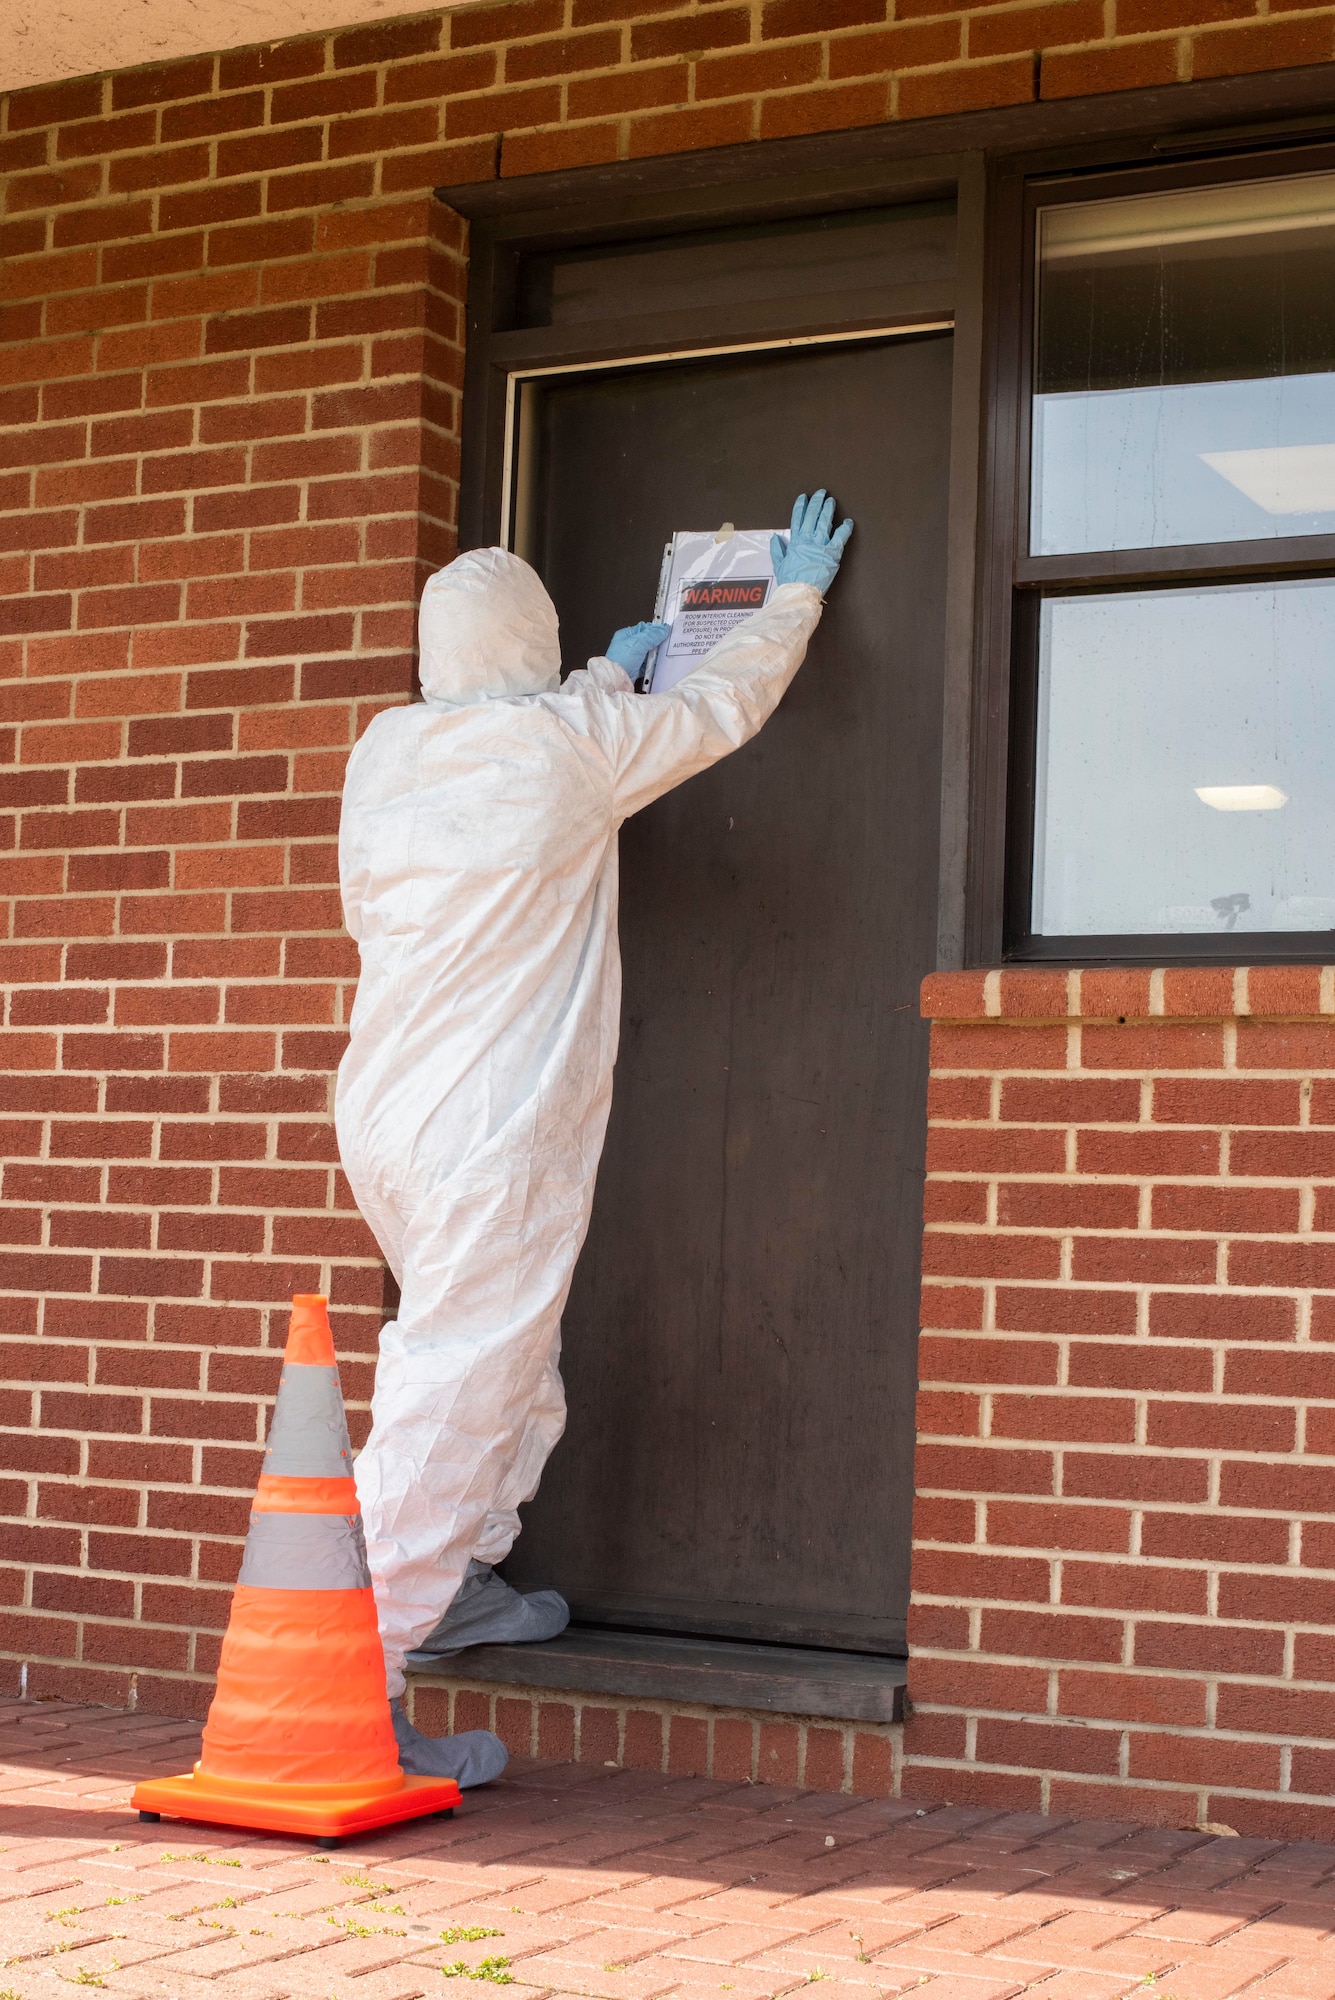 A Team Mildenhall member places an advisory sign on the outside of a dorm room as part of cleaning-team training at RAF Mildenhall, England, April 15, 2020. Cleaning-team members are trained to sanitize facilities that house isolated Airmen if contracted cleaning companies are unable to due to the COVID-19 pandemic. (U.S. Air Force photo by Airman 1st Class Joseph Barron)